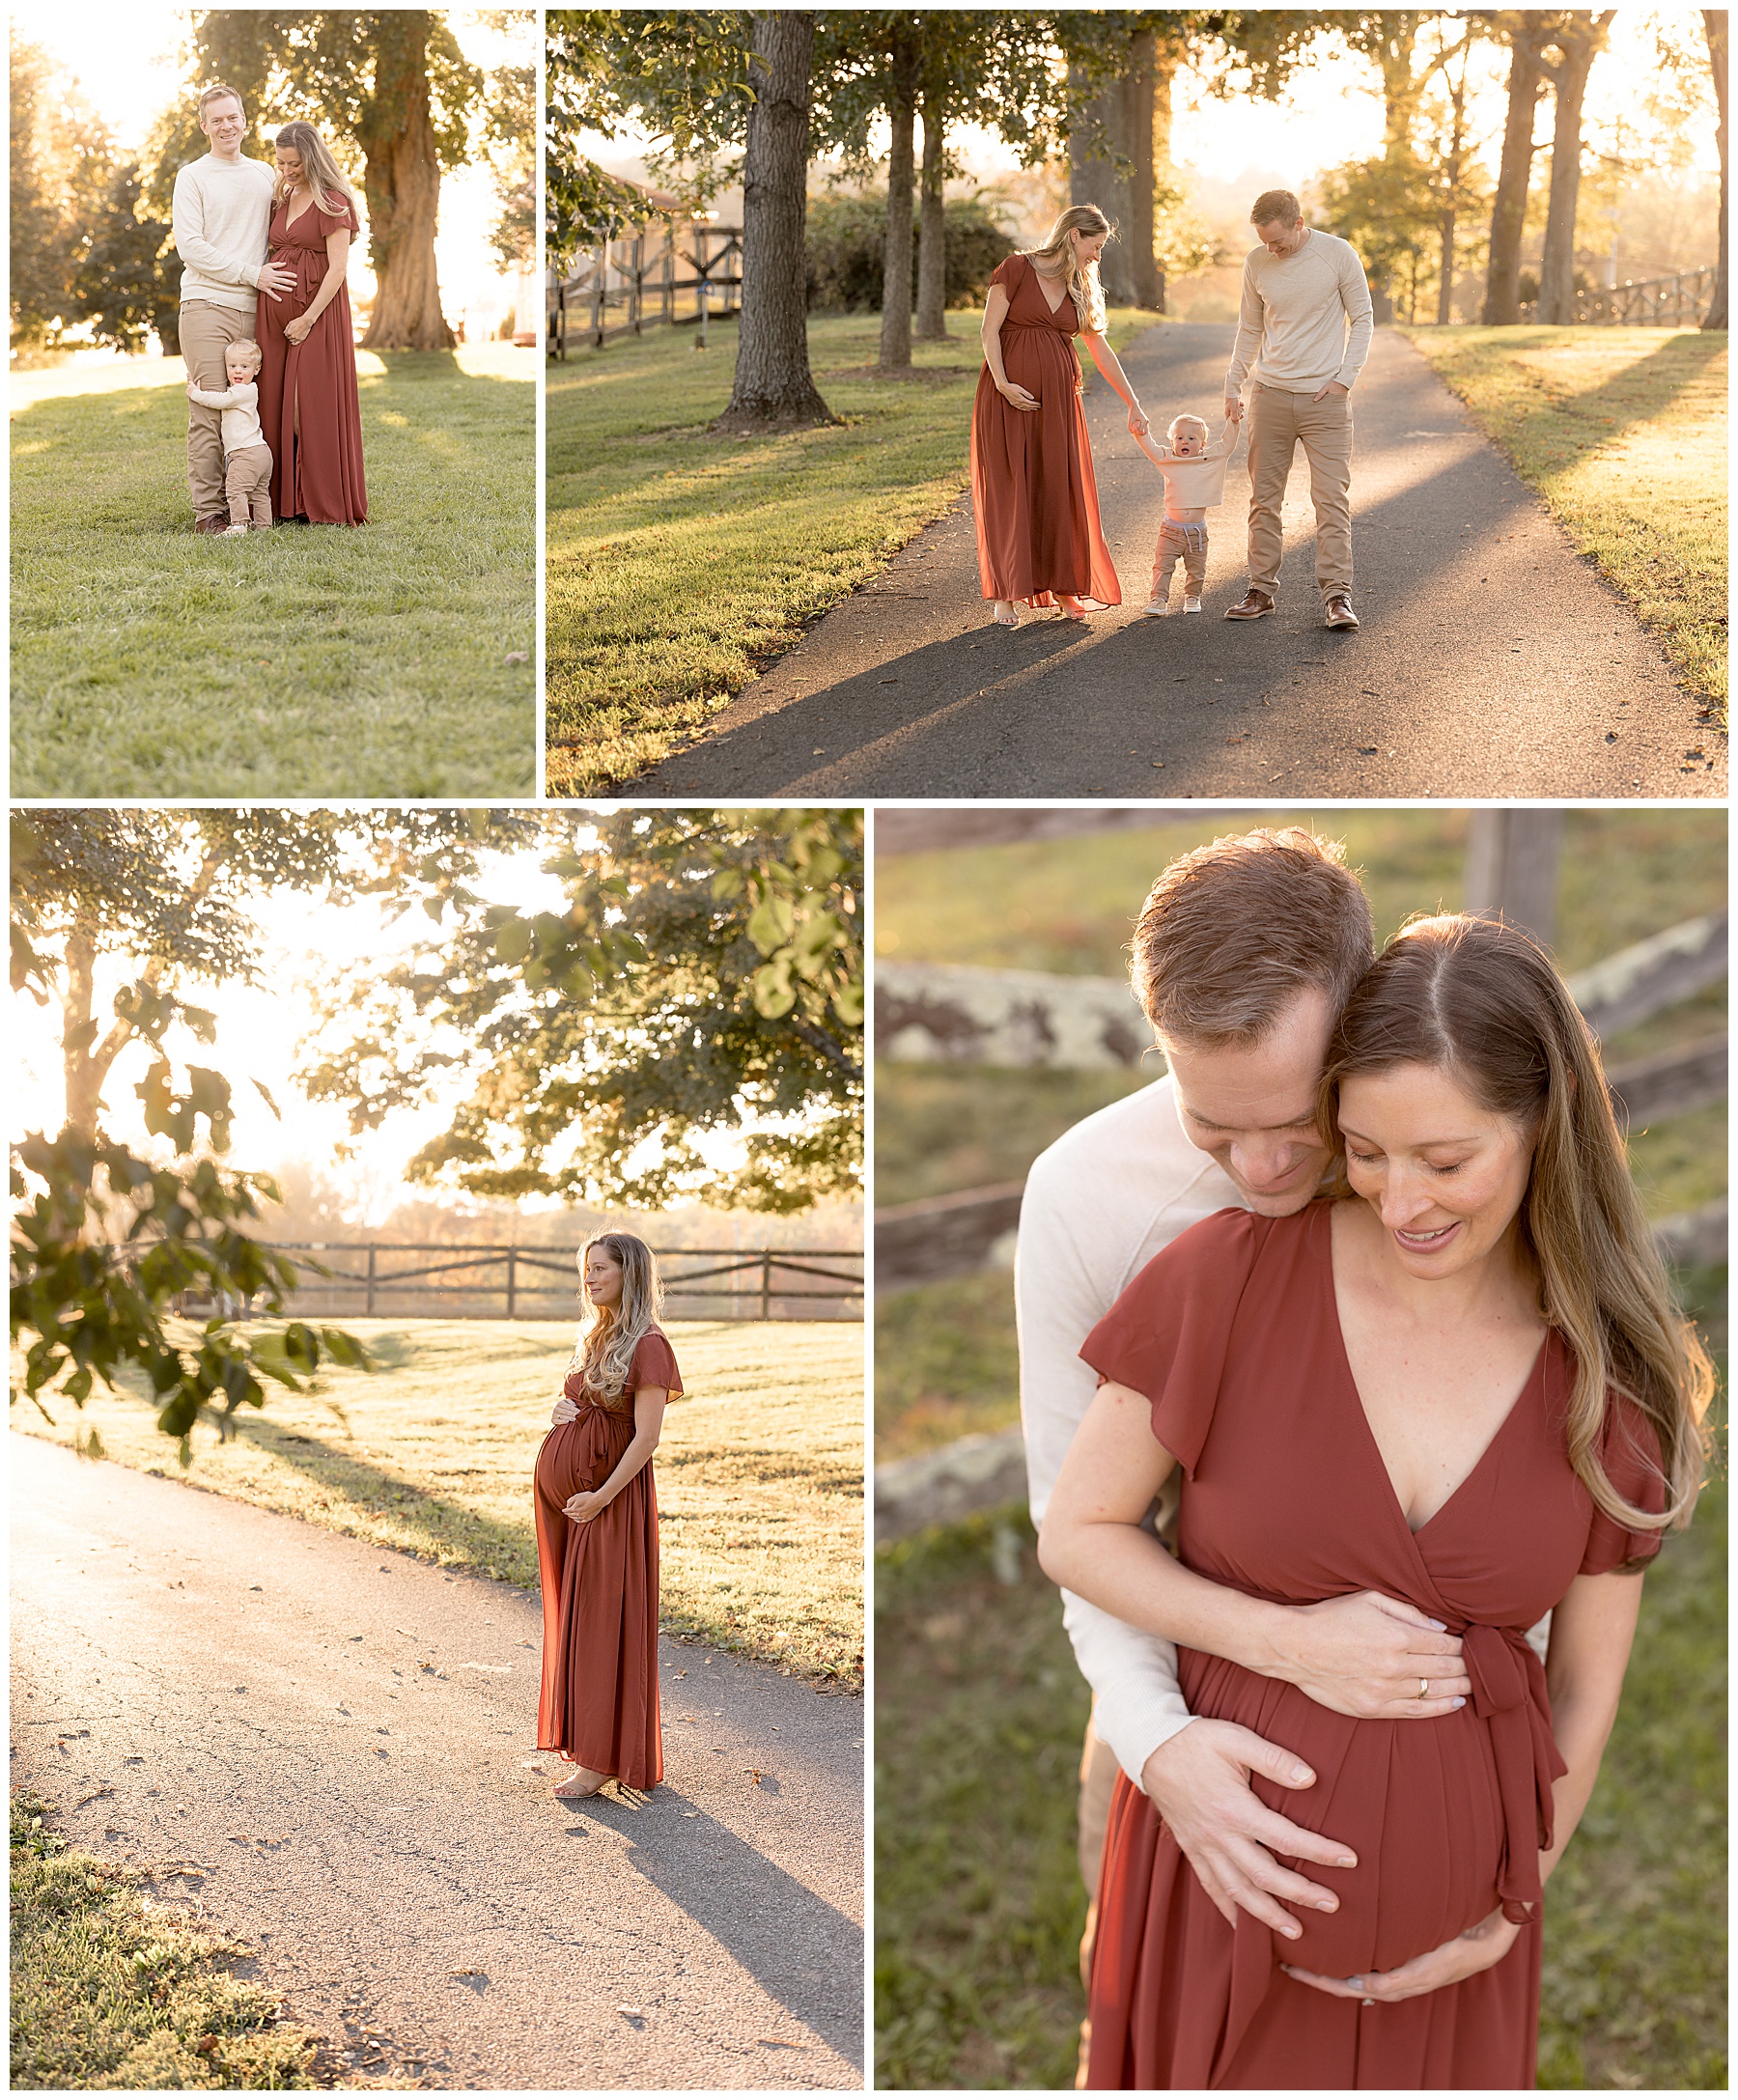 Maternity photography, beautifully showcased by a momma in a rust-colored dress, being loved on by her two best men